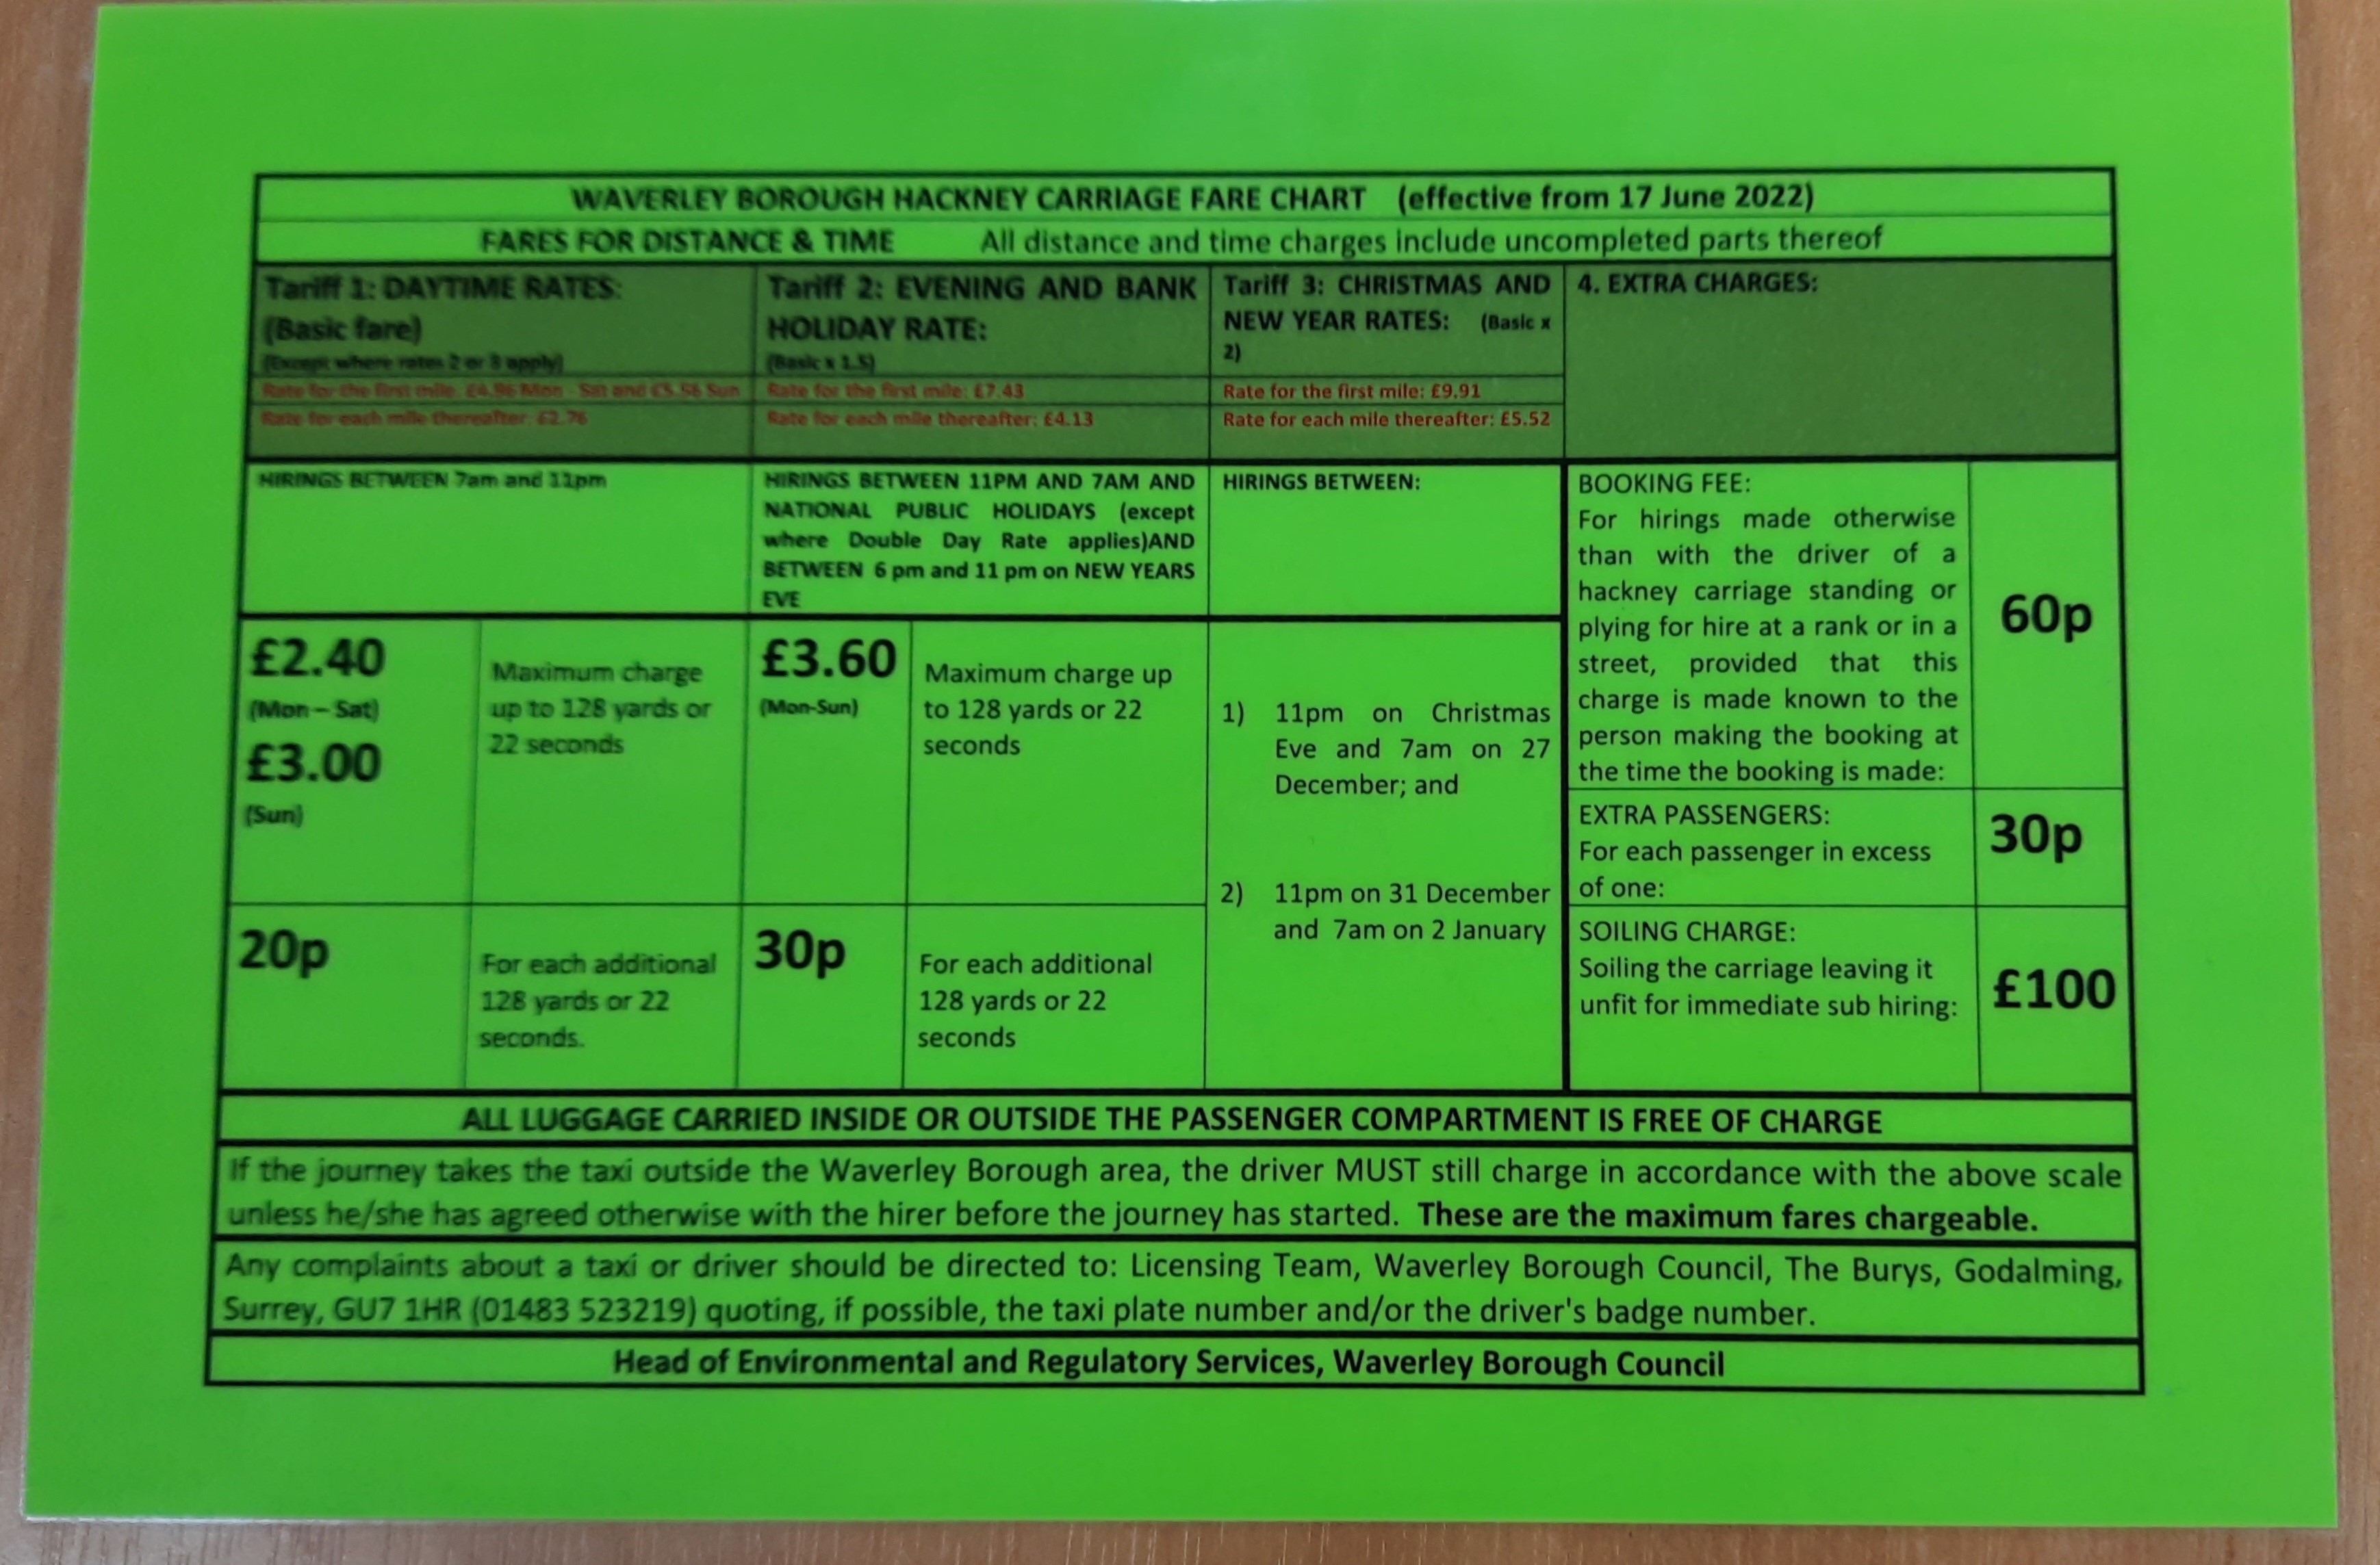 Image of the taxi fare chart printed on lime green card, by way of example